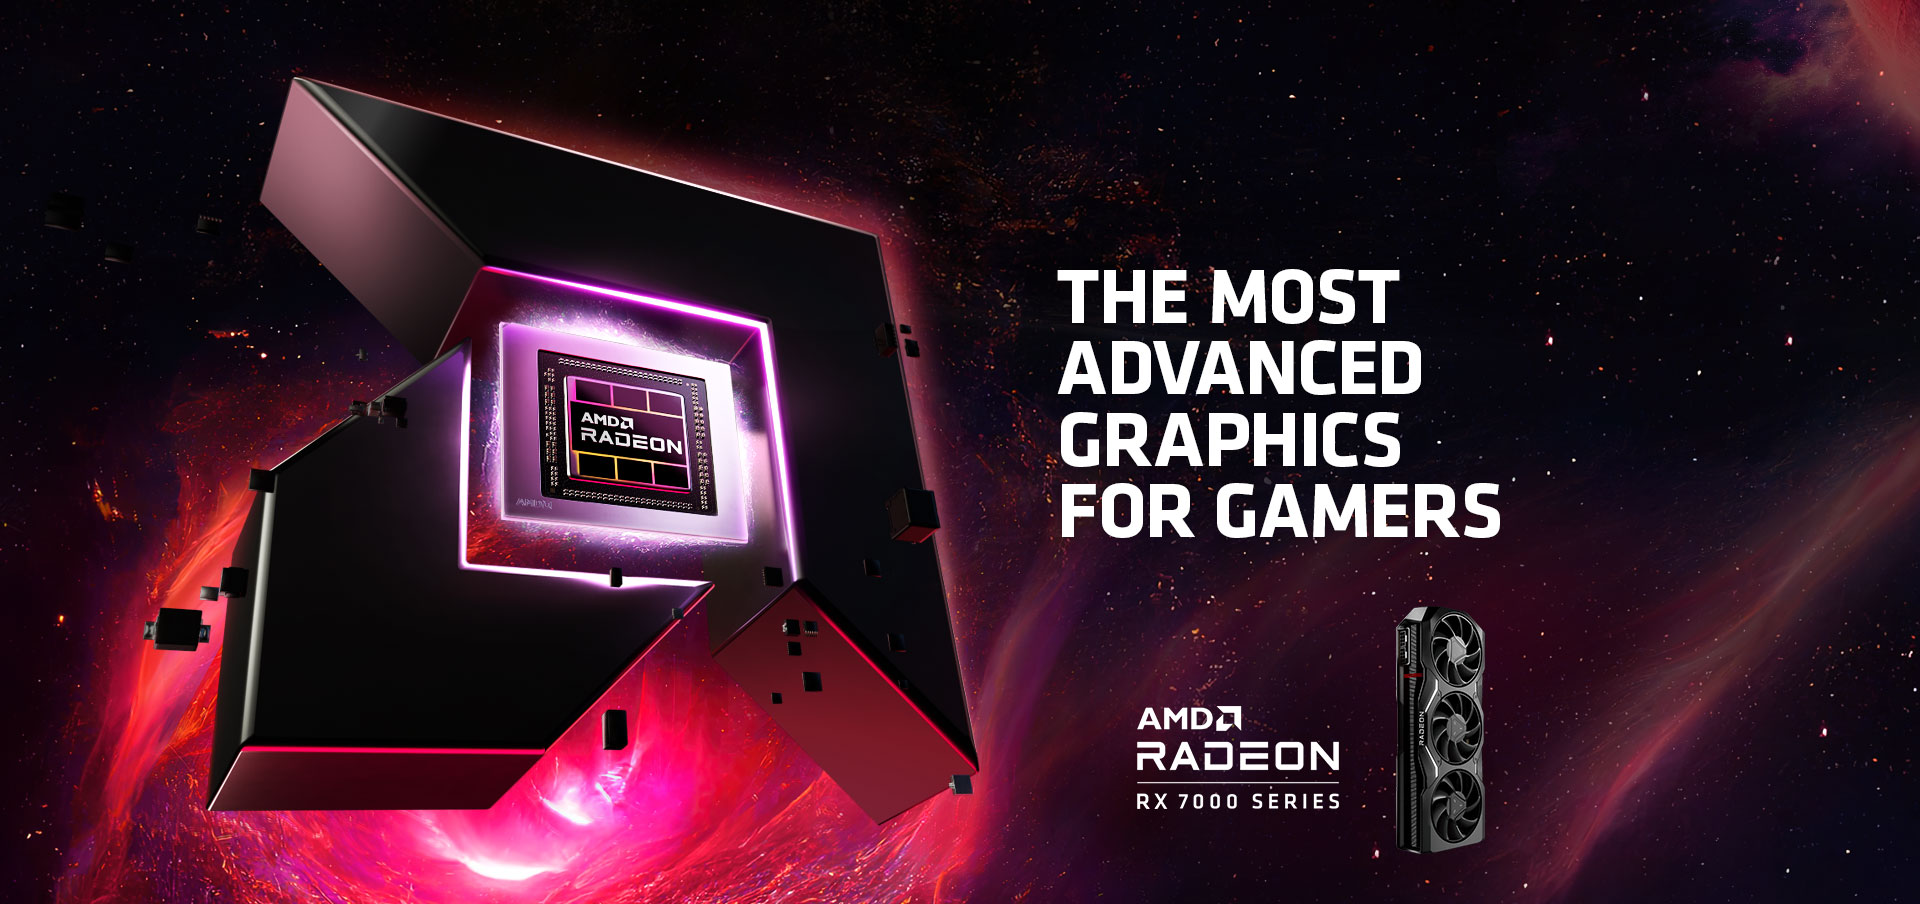 AMD Radeon RX 7000 Series - The Most advanced graphics for gamers